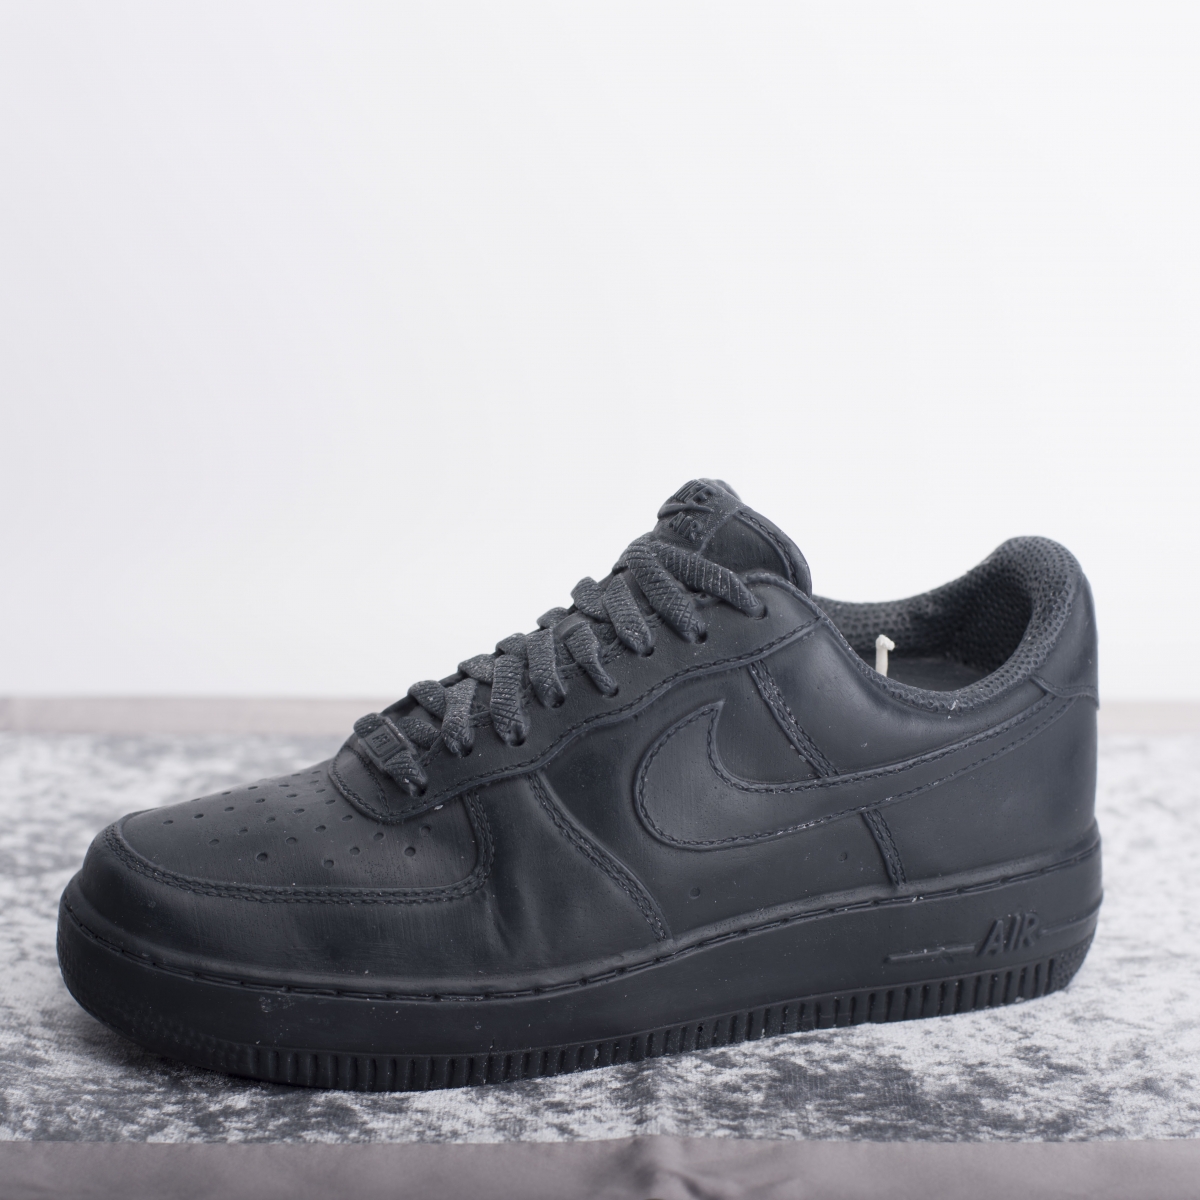 Black Air Force 1 Sneaker Trainer Shoes Sculpture Candles Scented Sandlwood-SCENTTRACES – шамъҳои хушбӯй, шамъҳои хушбӯй, шамъҳои хушбӯй, шамъҳои муми лубиё, шамъҳои муми занбӯри асал, шамъҳои муми кокос, шамъҳои гелӣ, шамъҳои гармкунанда, шамъҳои хушбӯй, шамъҳои хушбӯй, шамъҳои хушбӯй, шамъҳои хушбӯй шамъҳои экологӣ, шамъҳои заҳролуд, шамъҳои тунука, шамъҳои бетонӣ, шамъҳои терраззо, шамъҳои шишагӣ, шамъҳои сафолӣ, шамъҳои LED, шамъҳои беалов, шамъҳои дастӣ рехташуда, маҷмӯи тӯҳфаҳои шамъ, шамъҳои сутун, шамъҳои ҳайкалӣ, шамъҳои шишагӣ, шамъҳои шишагӣ, кружка, зарфҳои сафолии,